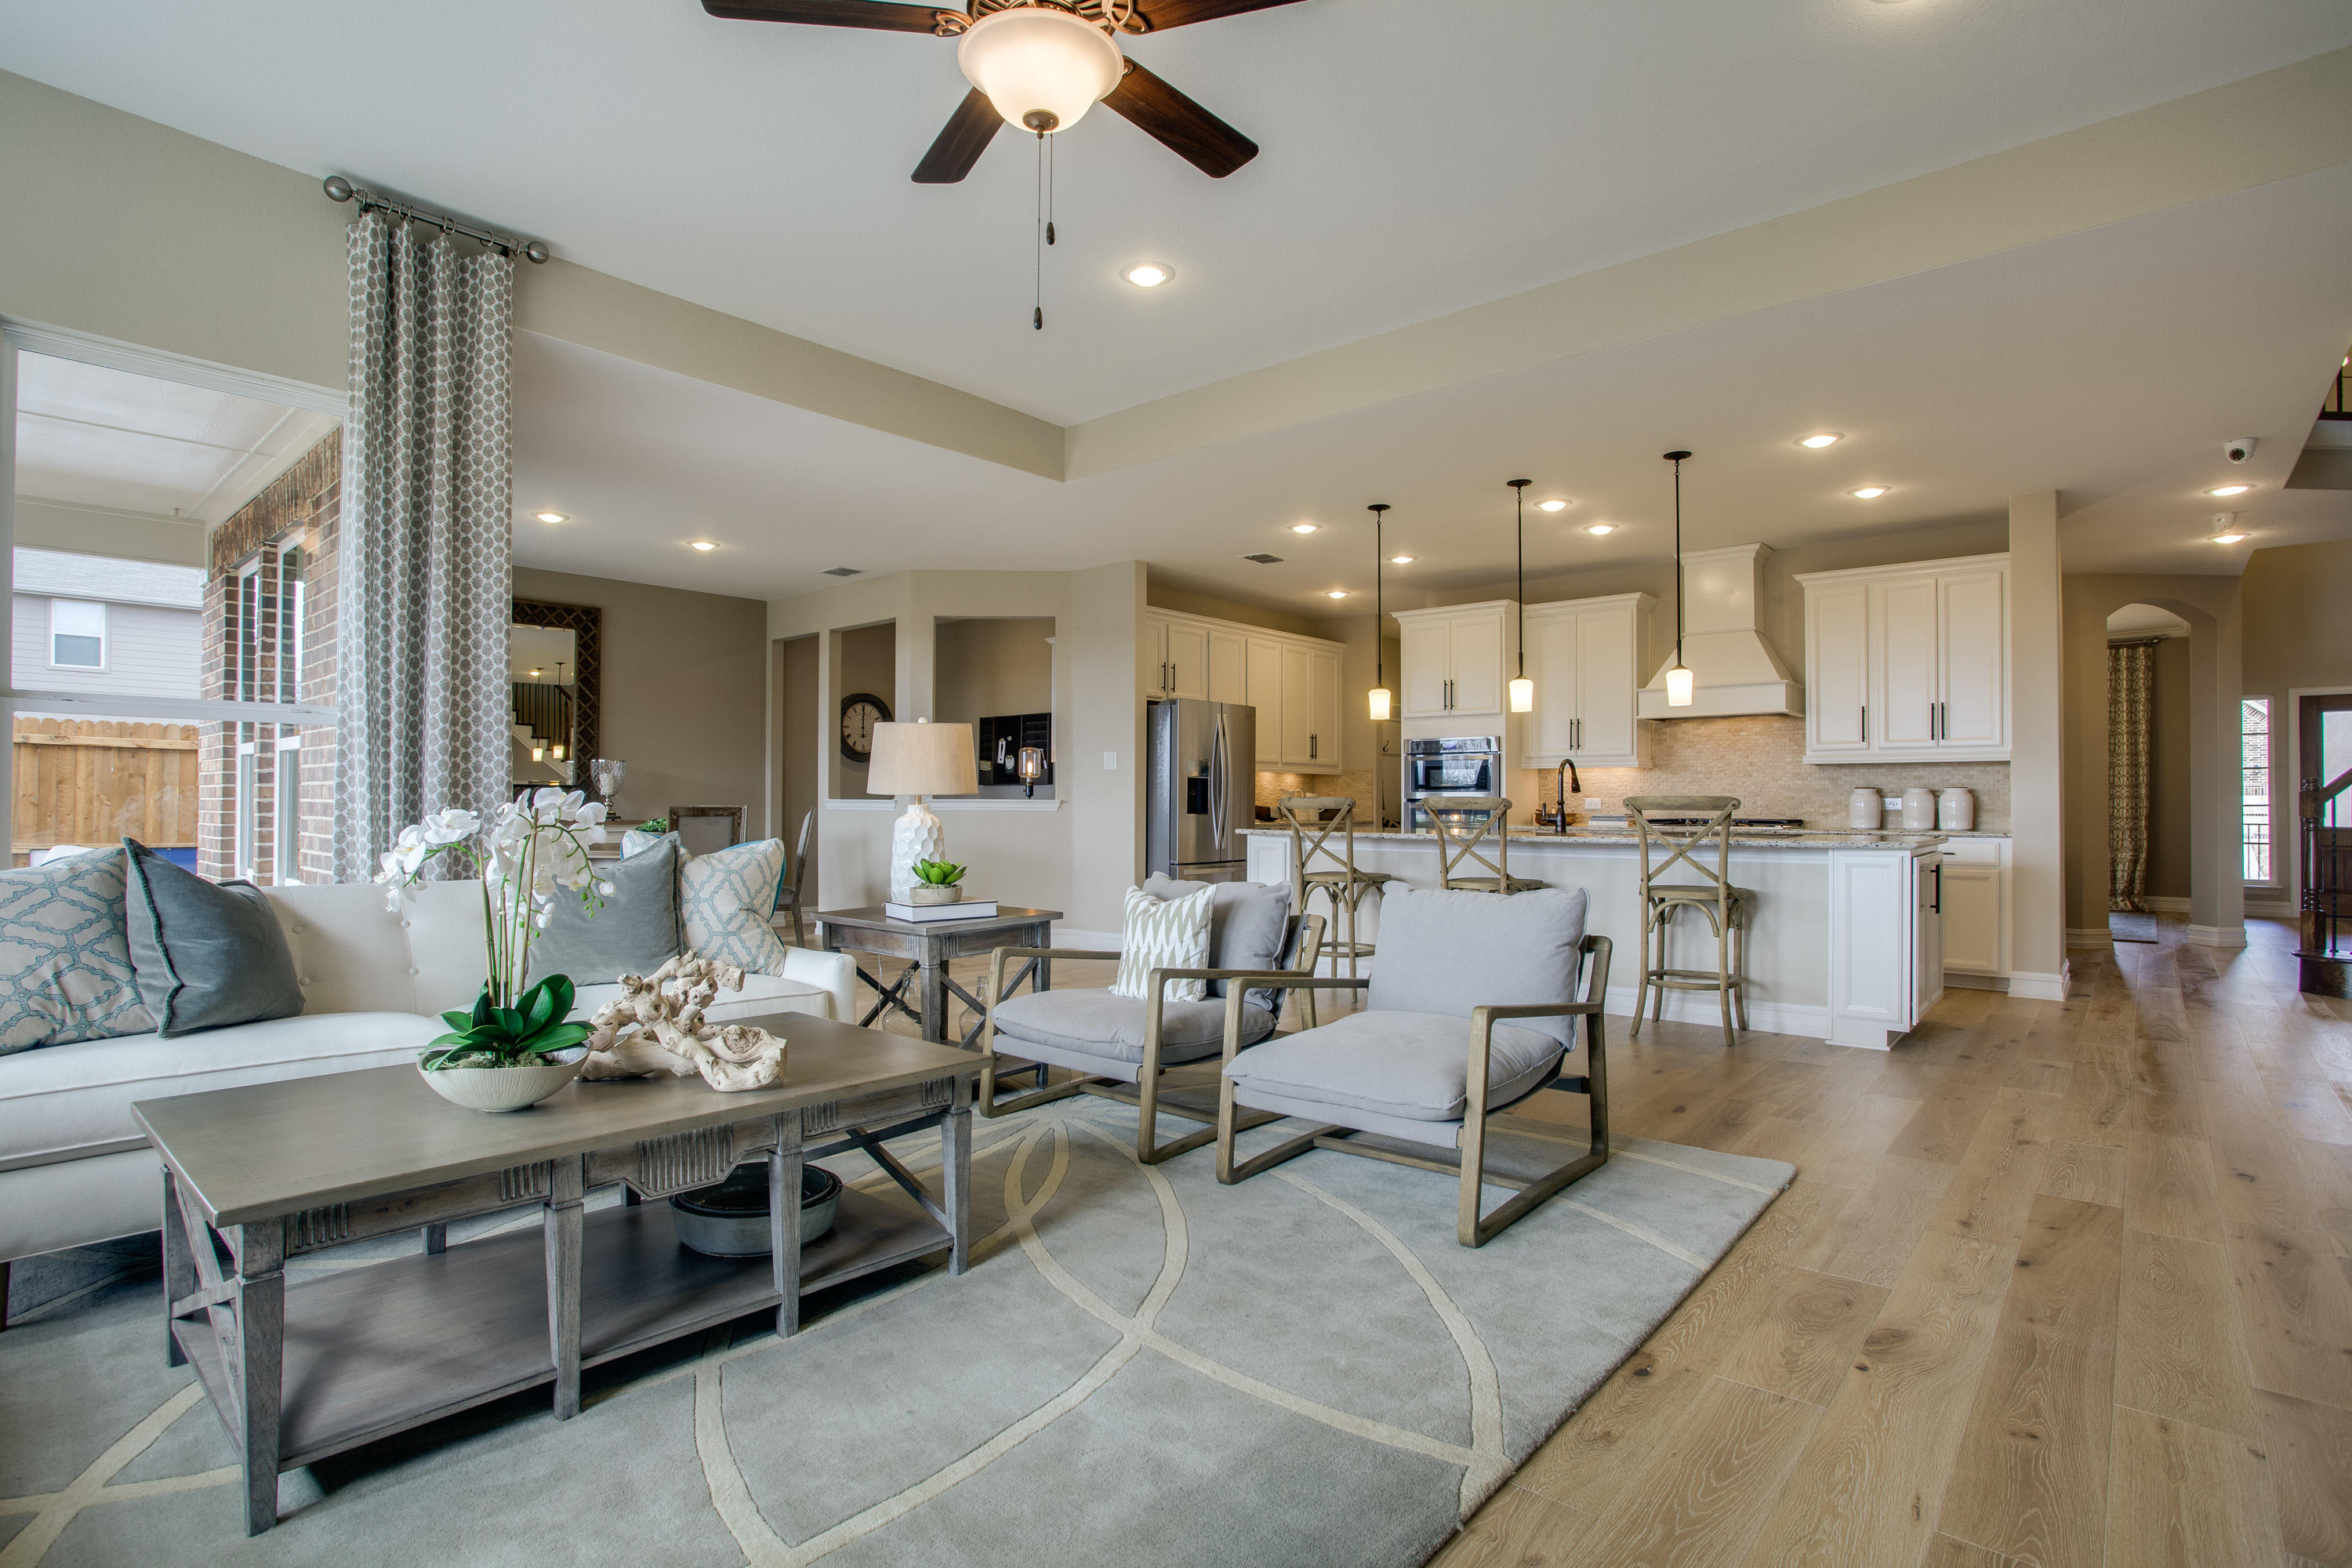 North Creek by Pulte Homes Photo